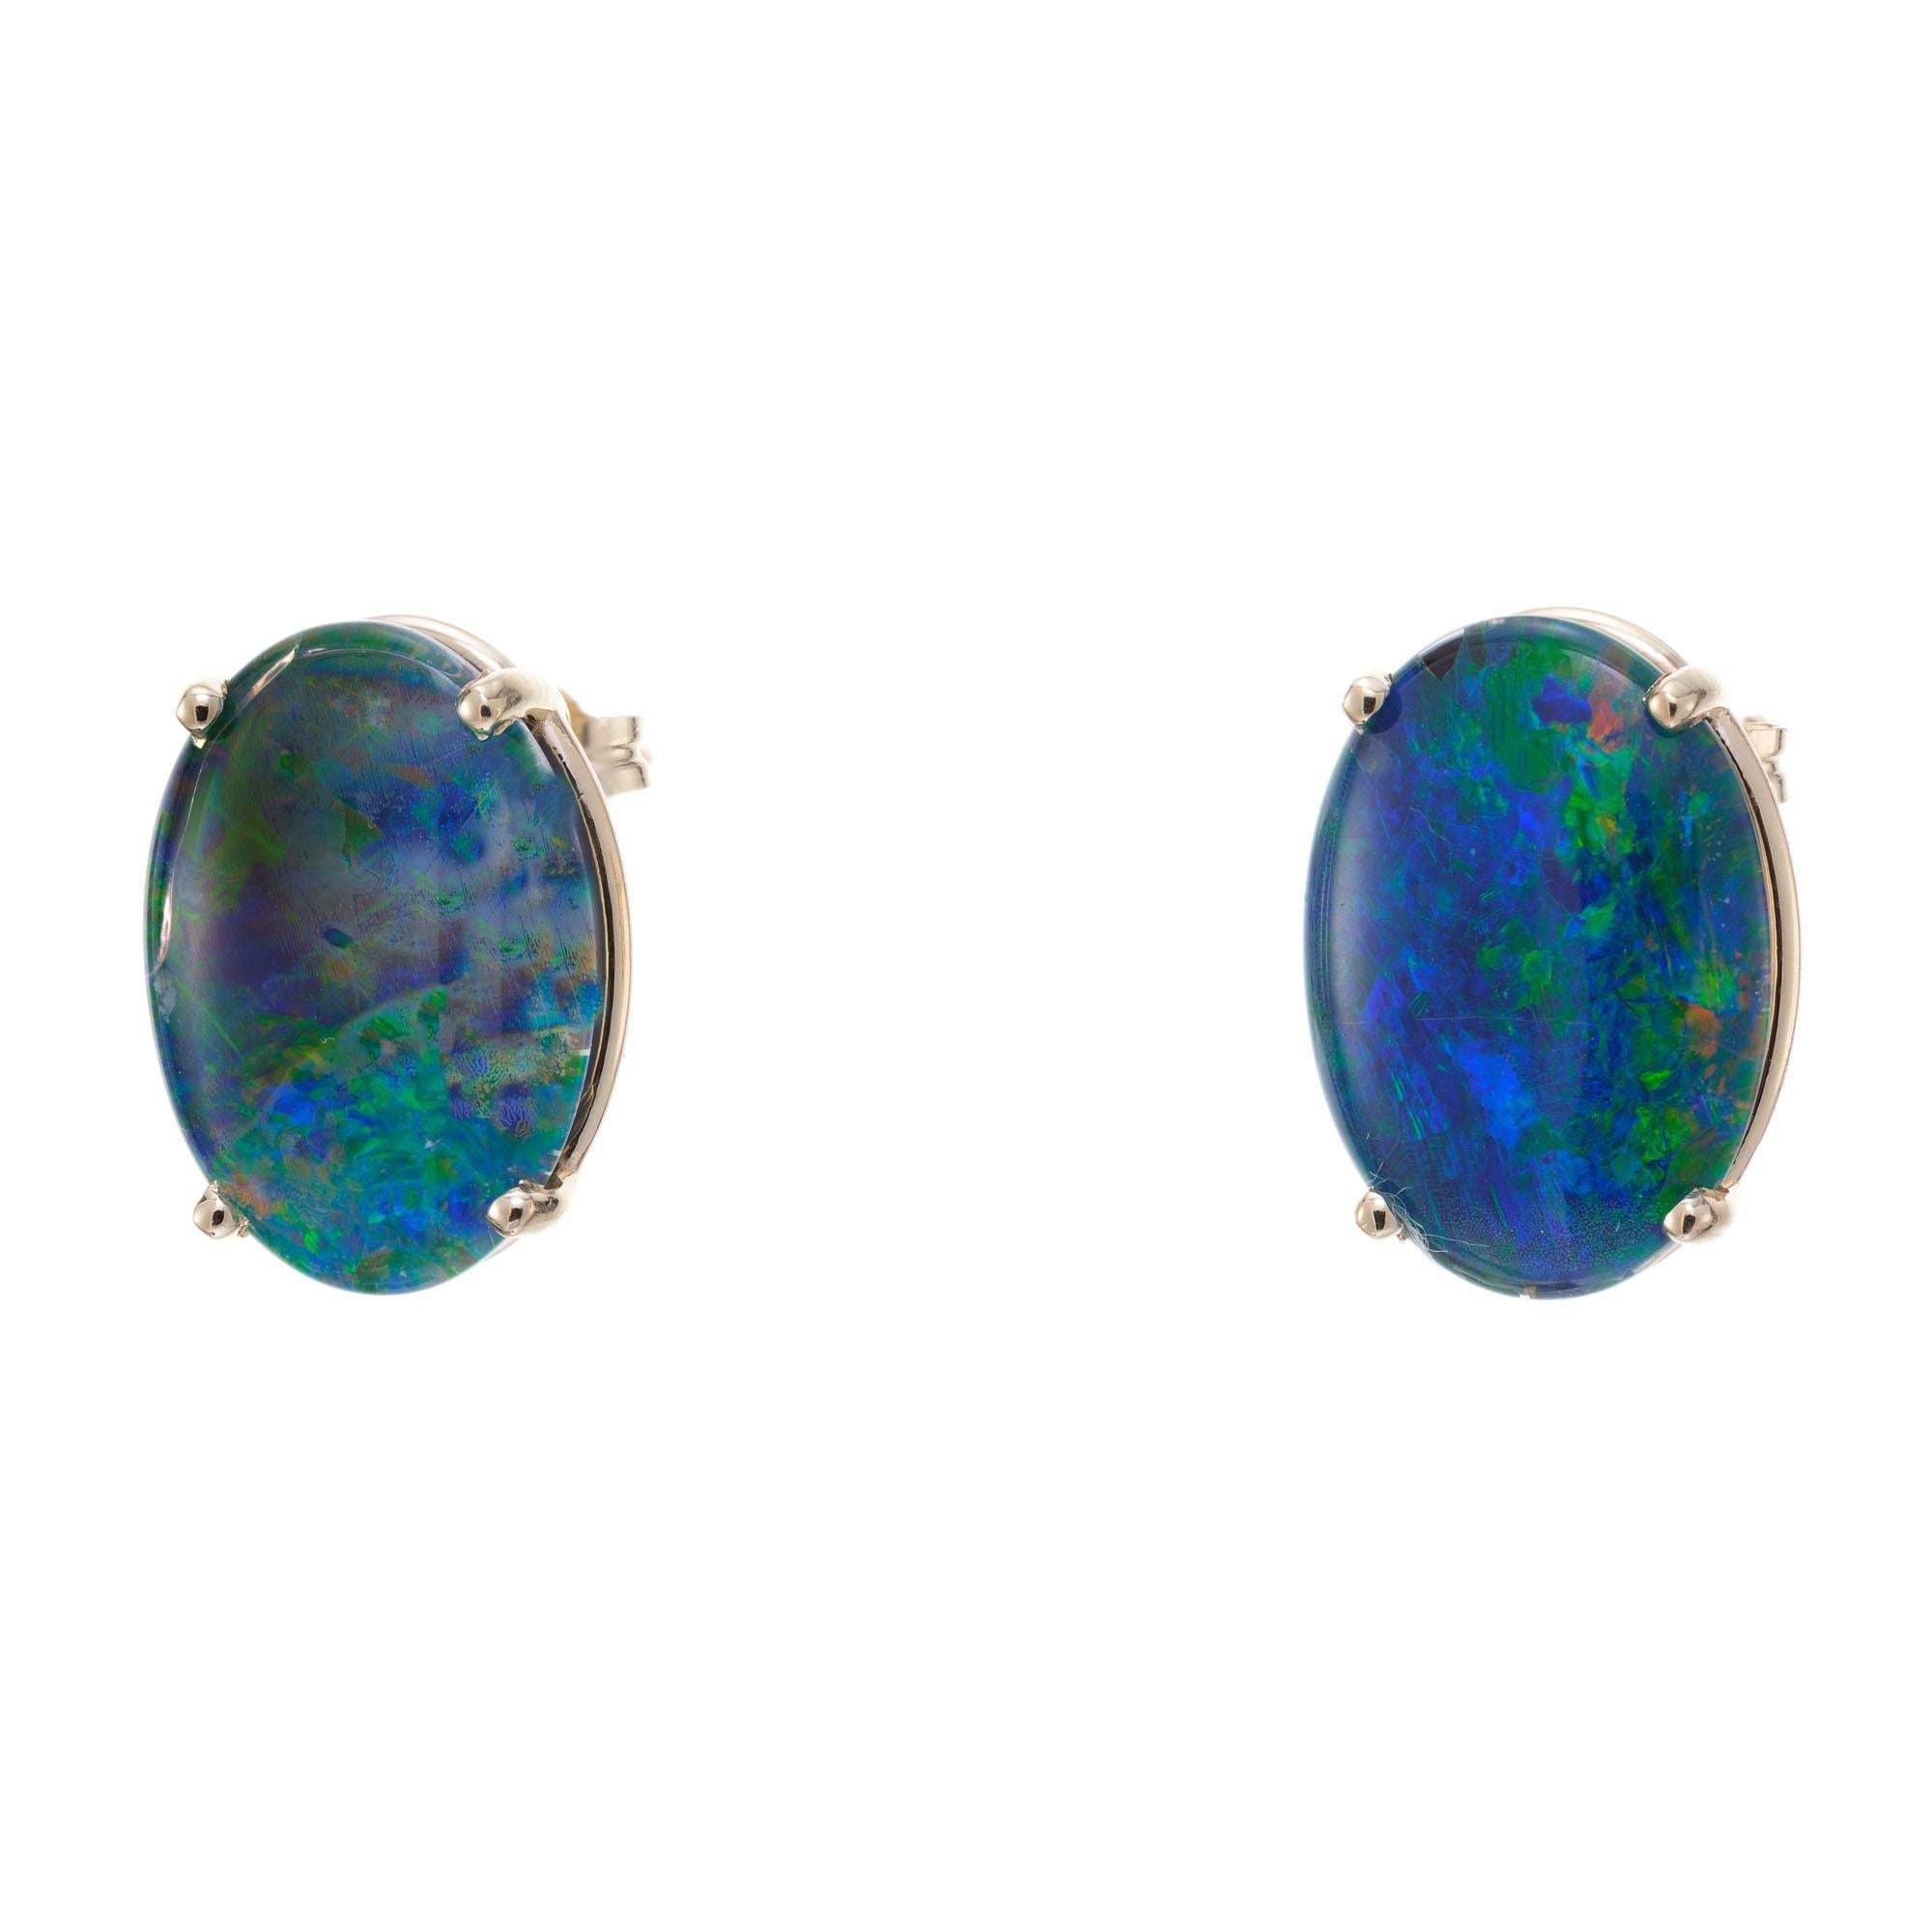 Oval opal earrings. Blue green oval triplets with red flash in 14k yellow gold four prong basket settings, with open work swirl gallery. Opal triplets are made with a slice of natural opal mounted on a  a black onyx base. The opal is covered by a